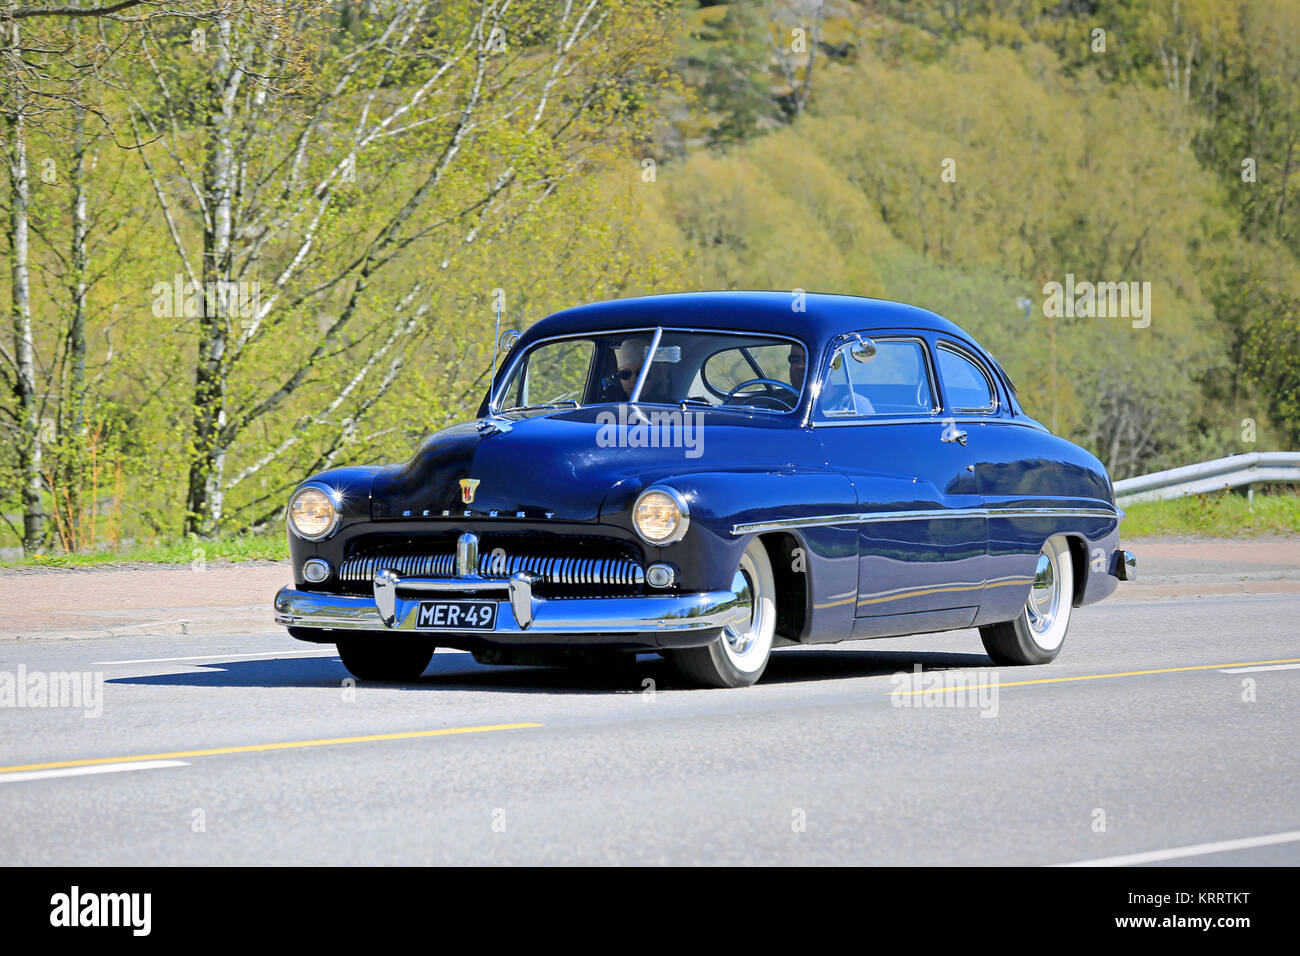 KAARINA, FINLAND - MAY 14, 2015: Classic black Mercury car in traffic. Mercury was a car brand of the Ford Motor Company launched in 1938 by Edsel For Stock Photo